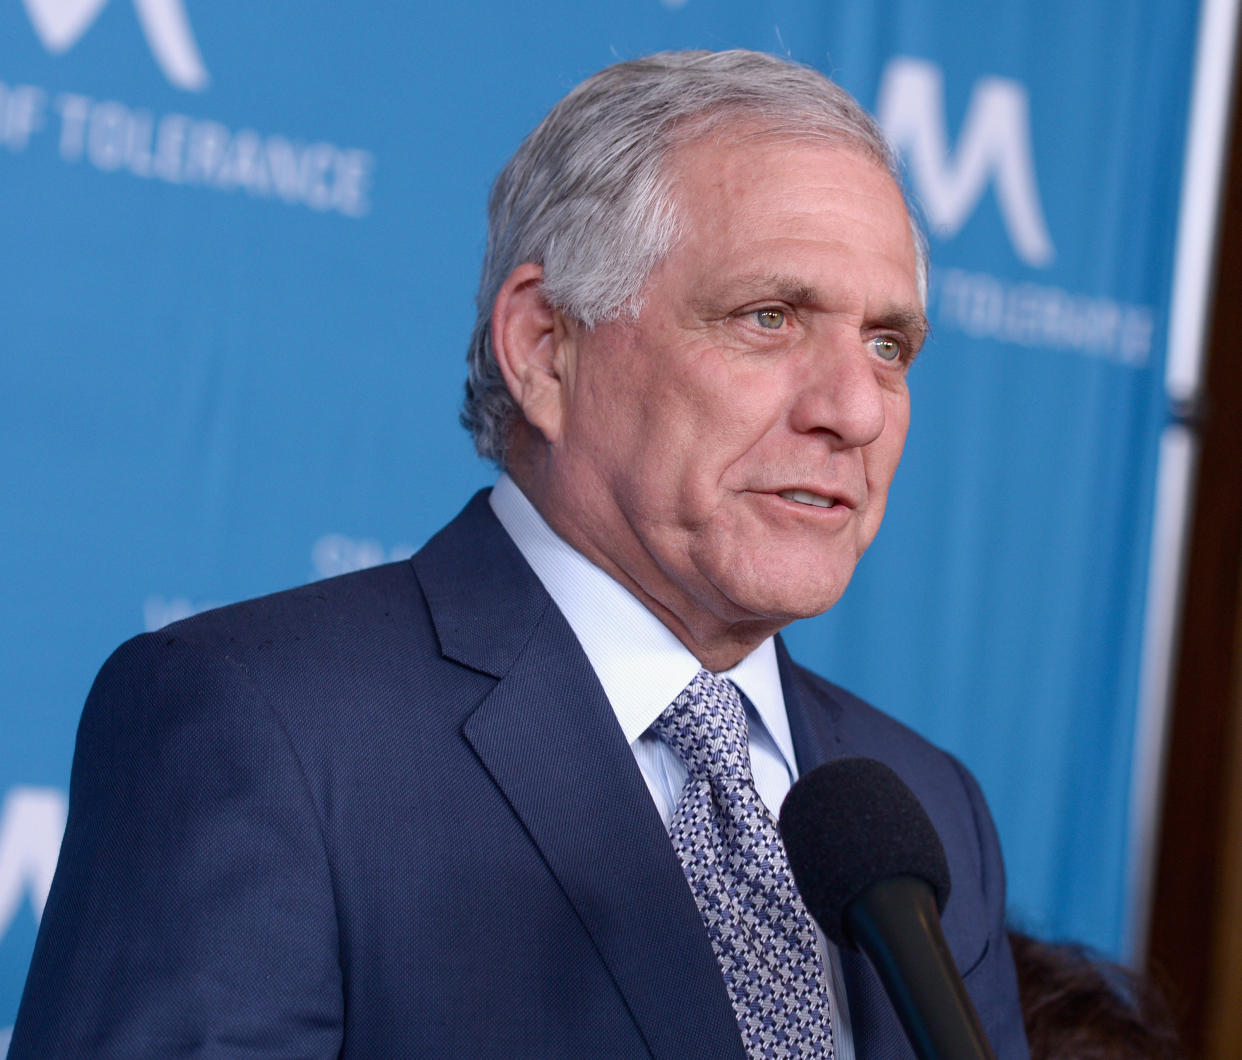 Les Moonves is honored at a dinner in Beverly Hills on March 22. (Photo: Tara Ziemba via Getty Images)